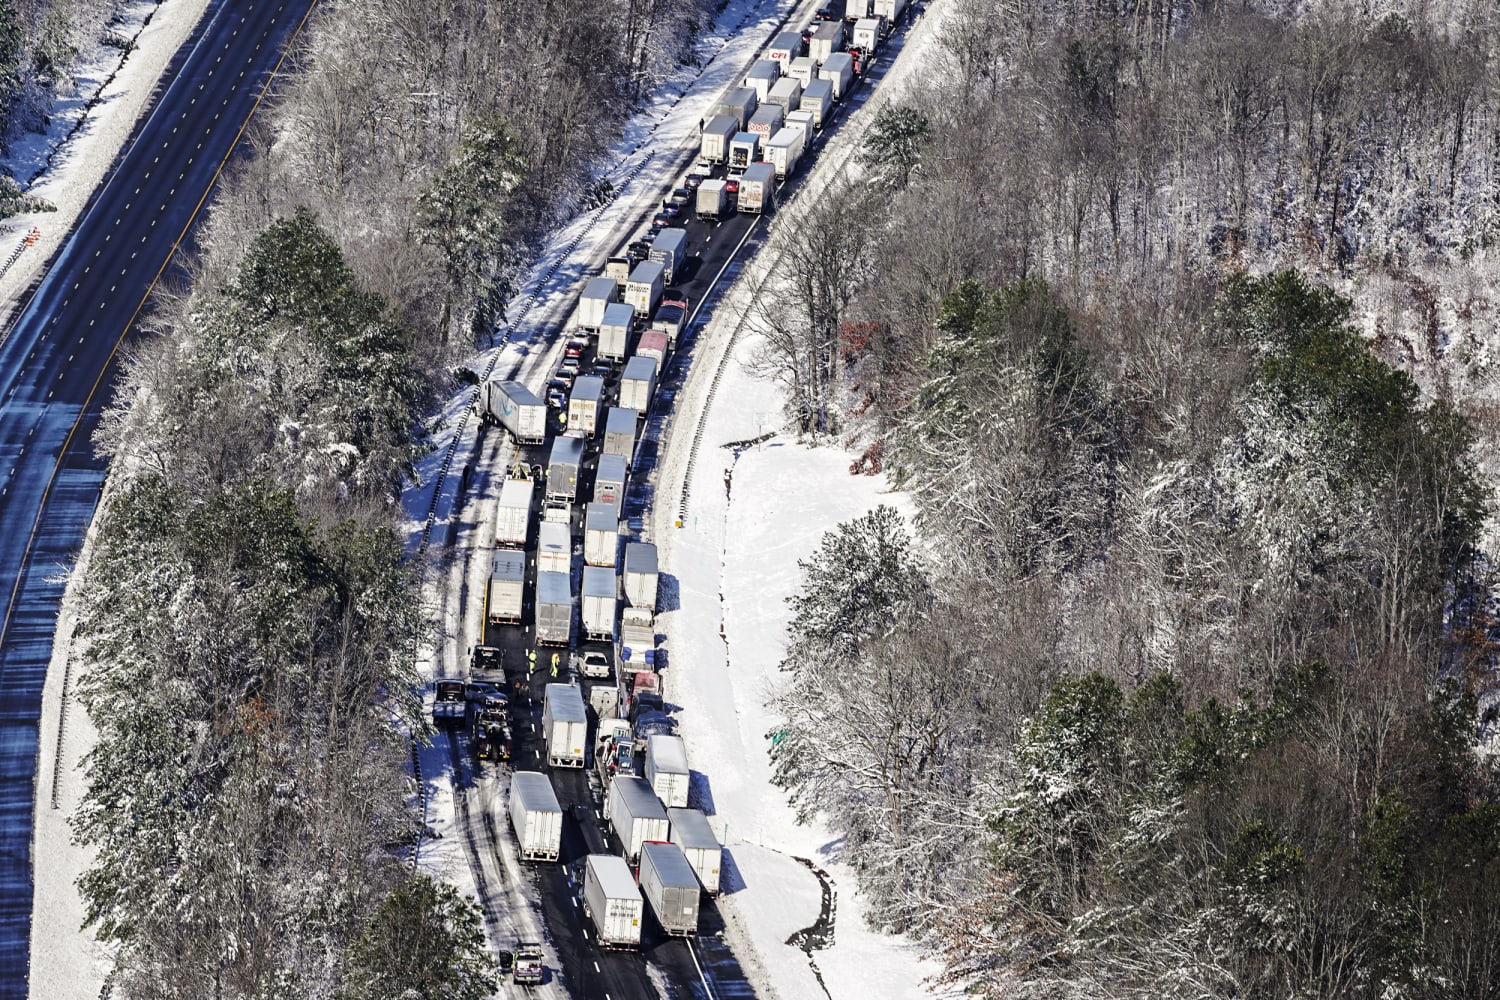 Drivers still stranded on I-95 in Virginia after winter storm